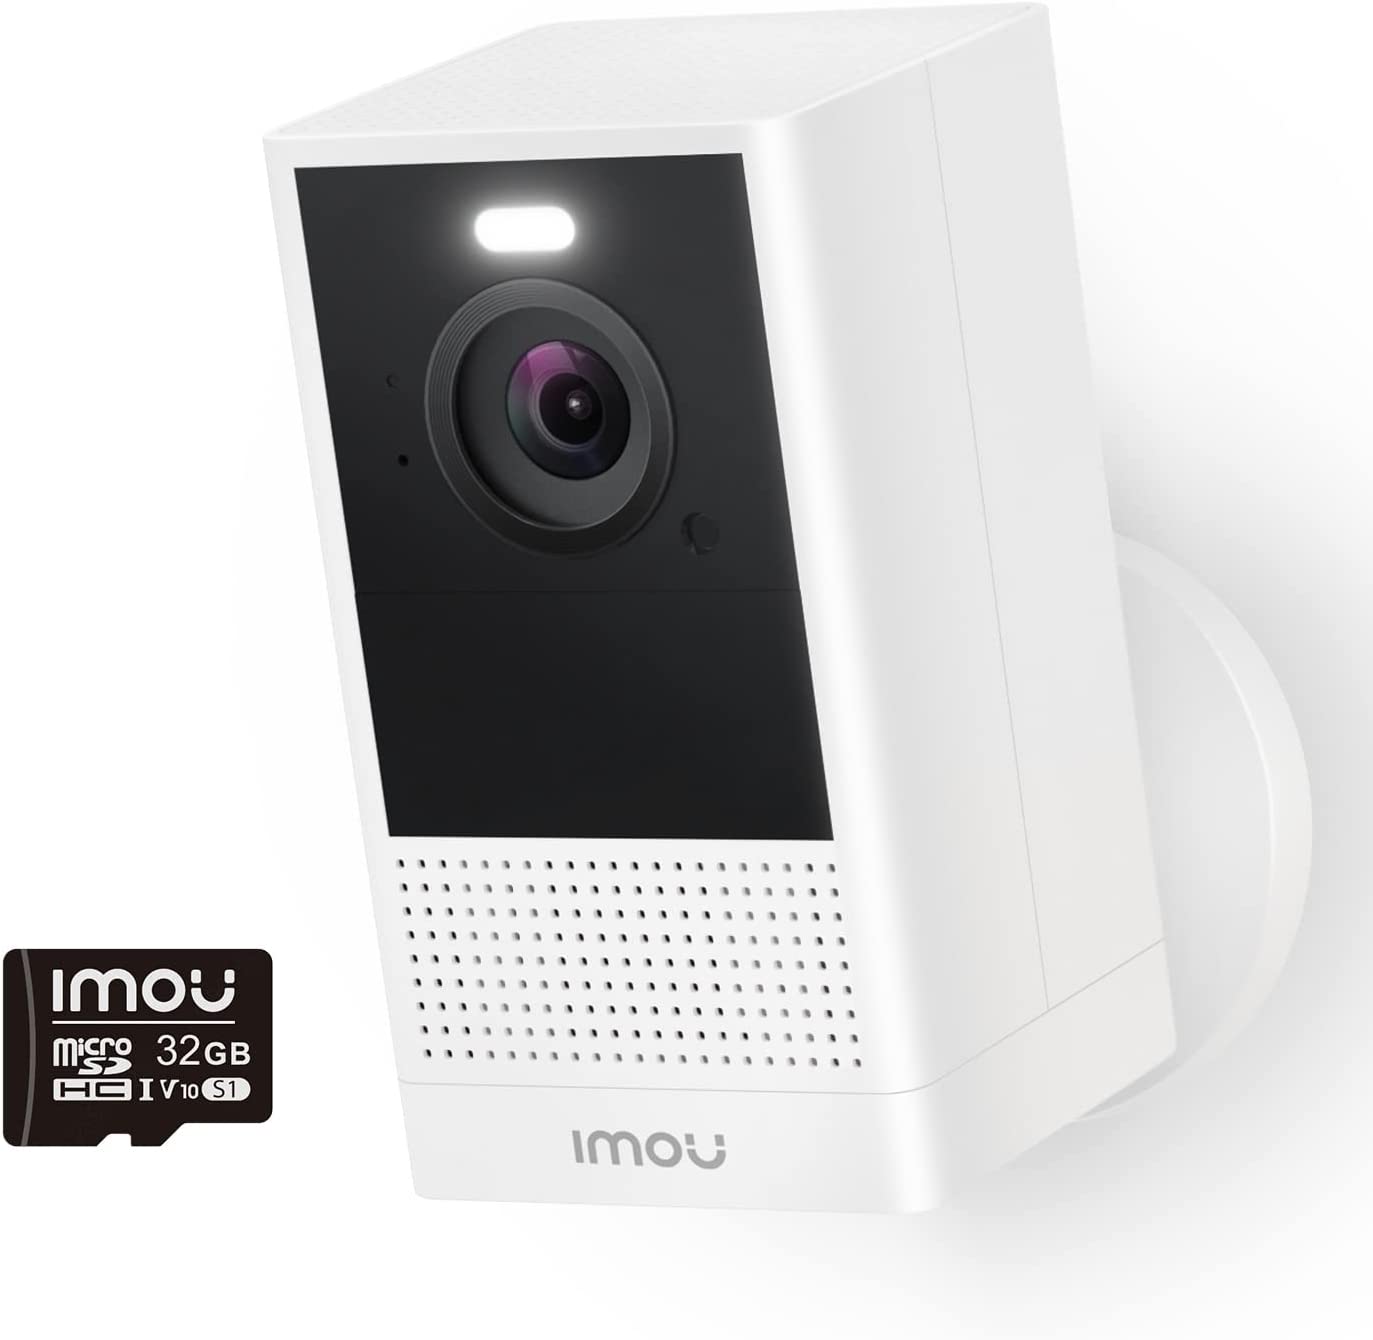 IMOU Cell 2 Security Camera